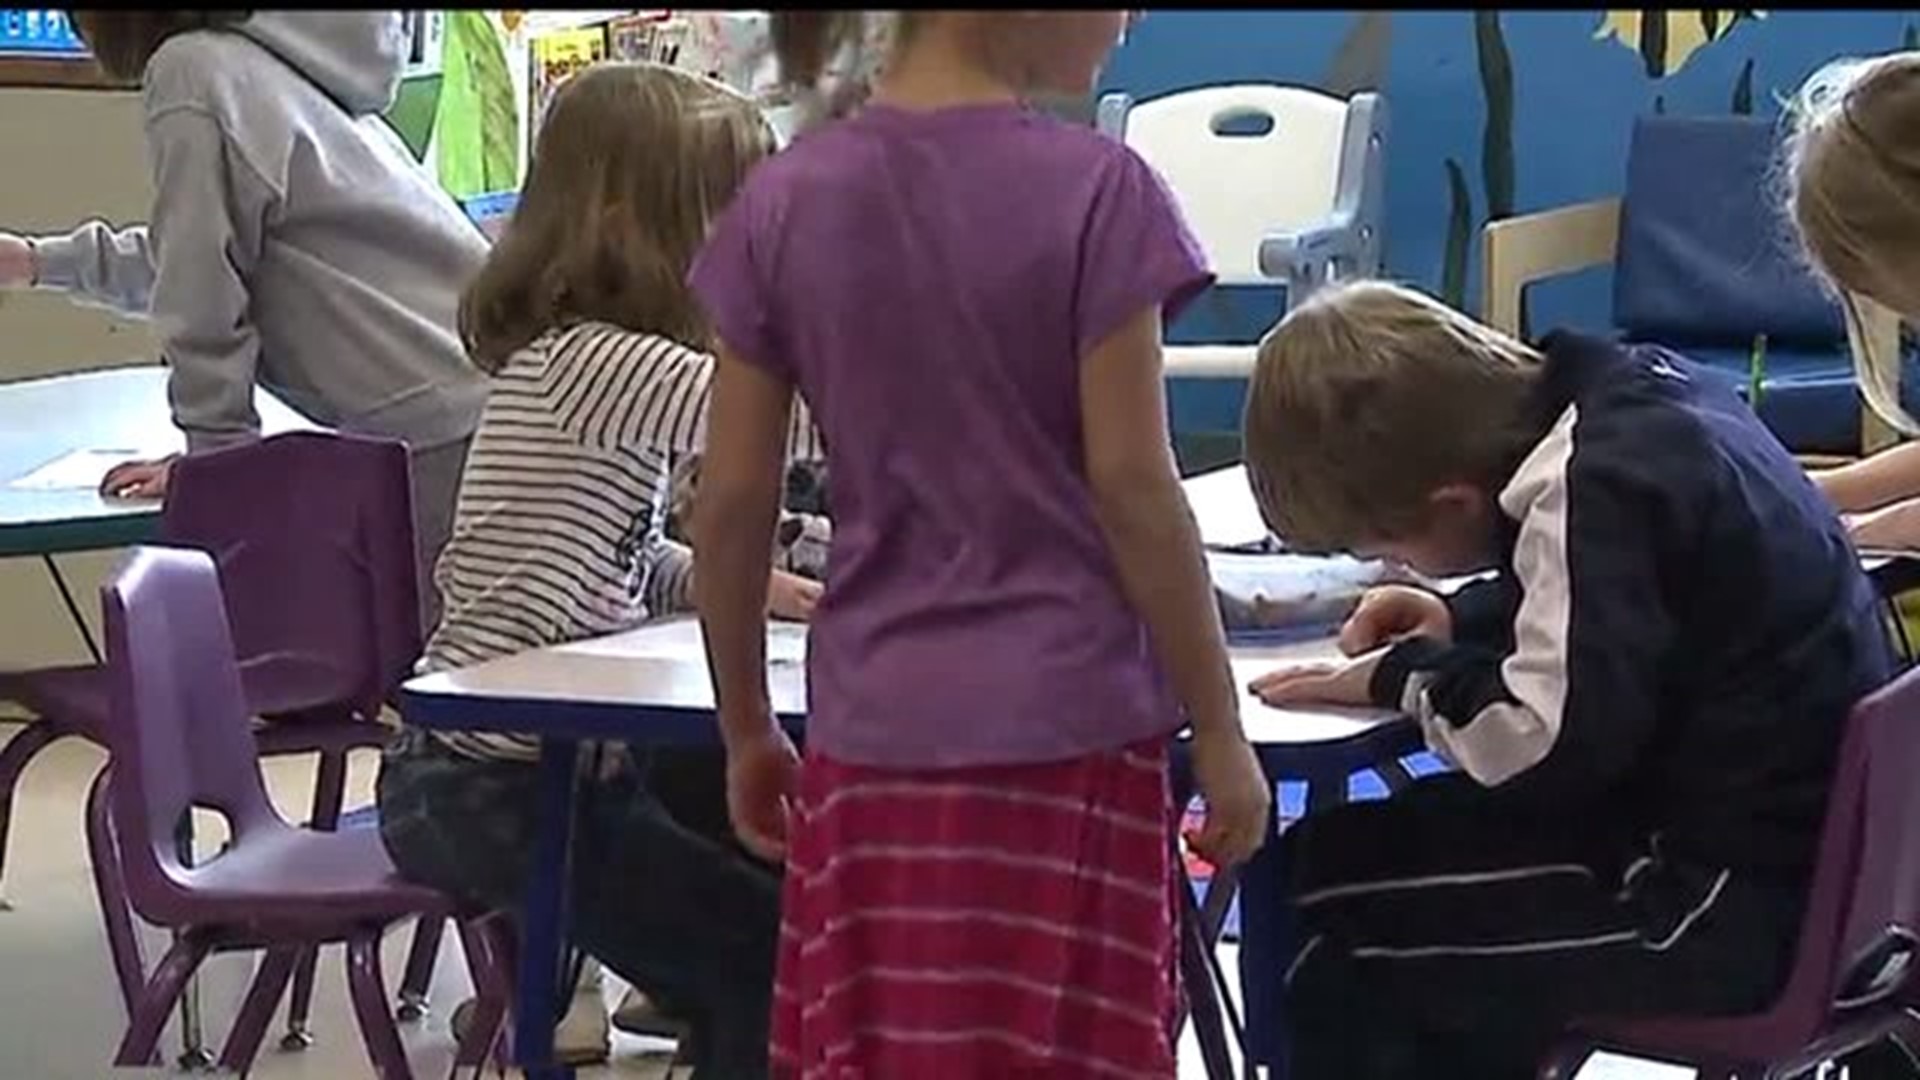 Statewide information system to protect children launched